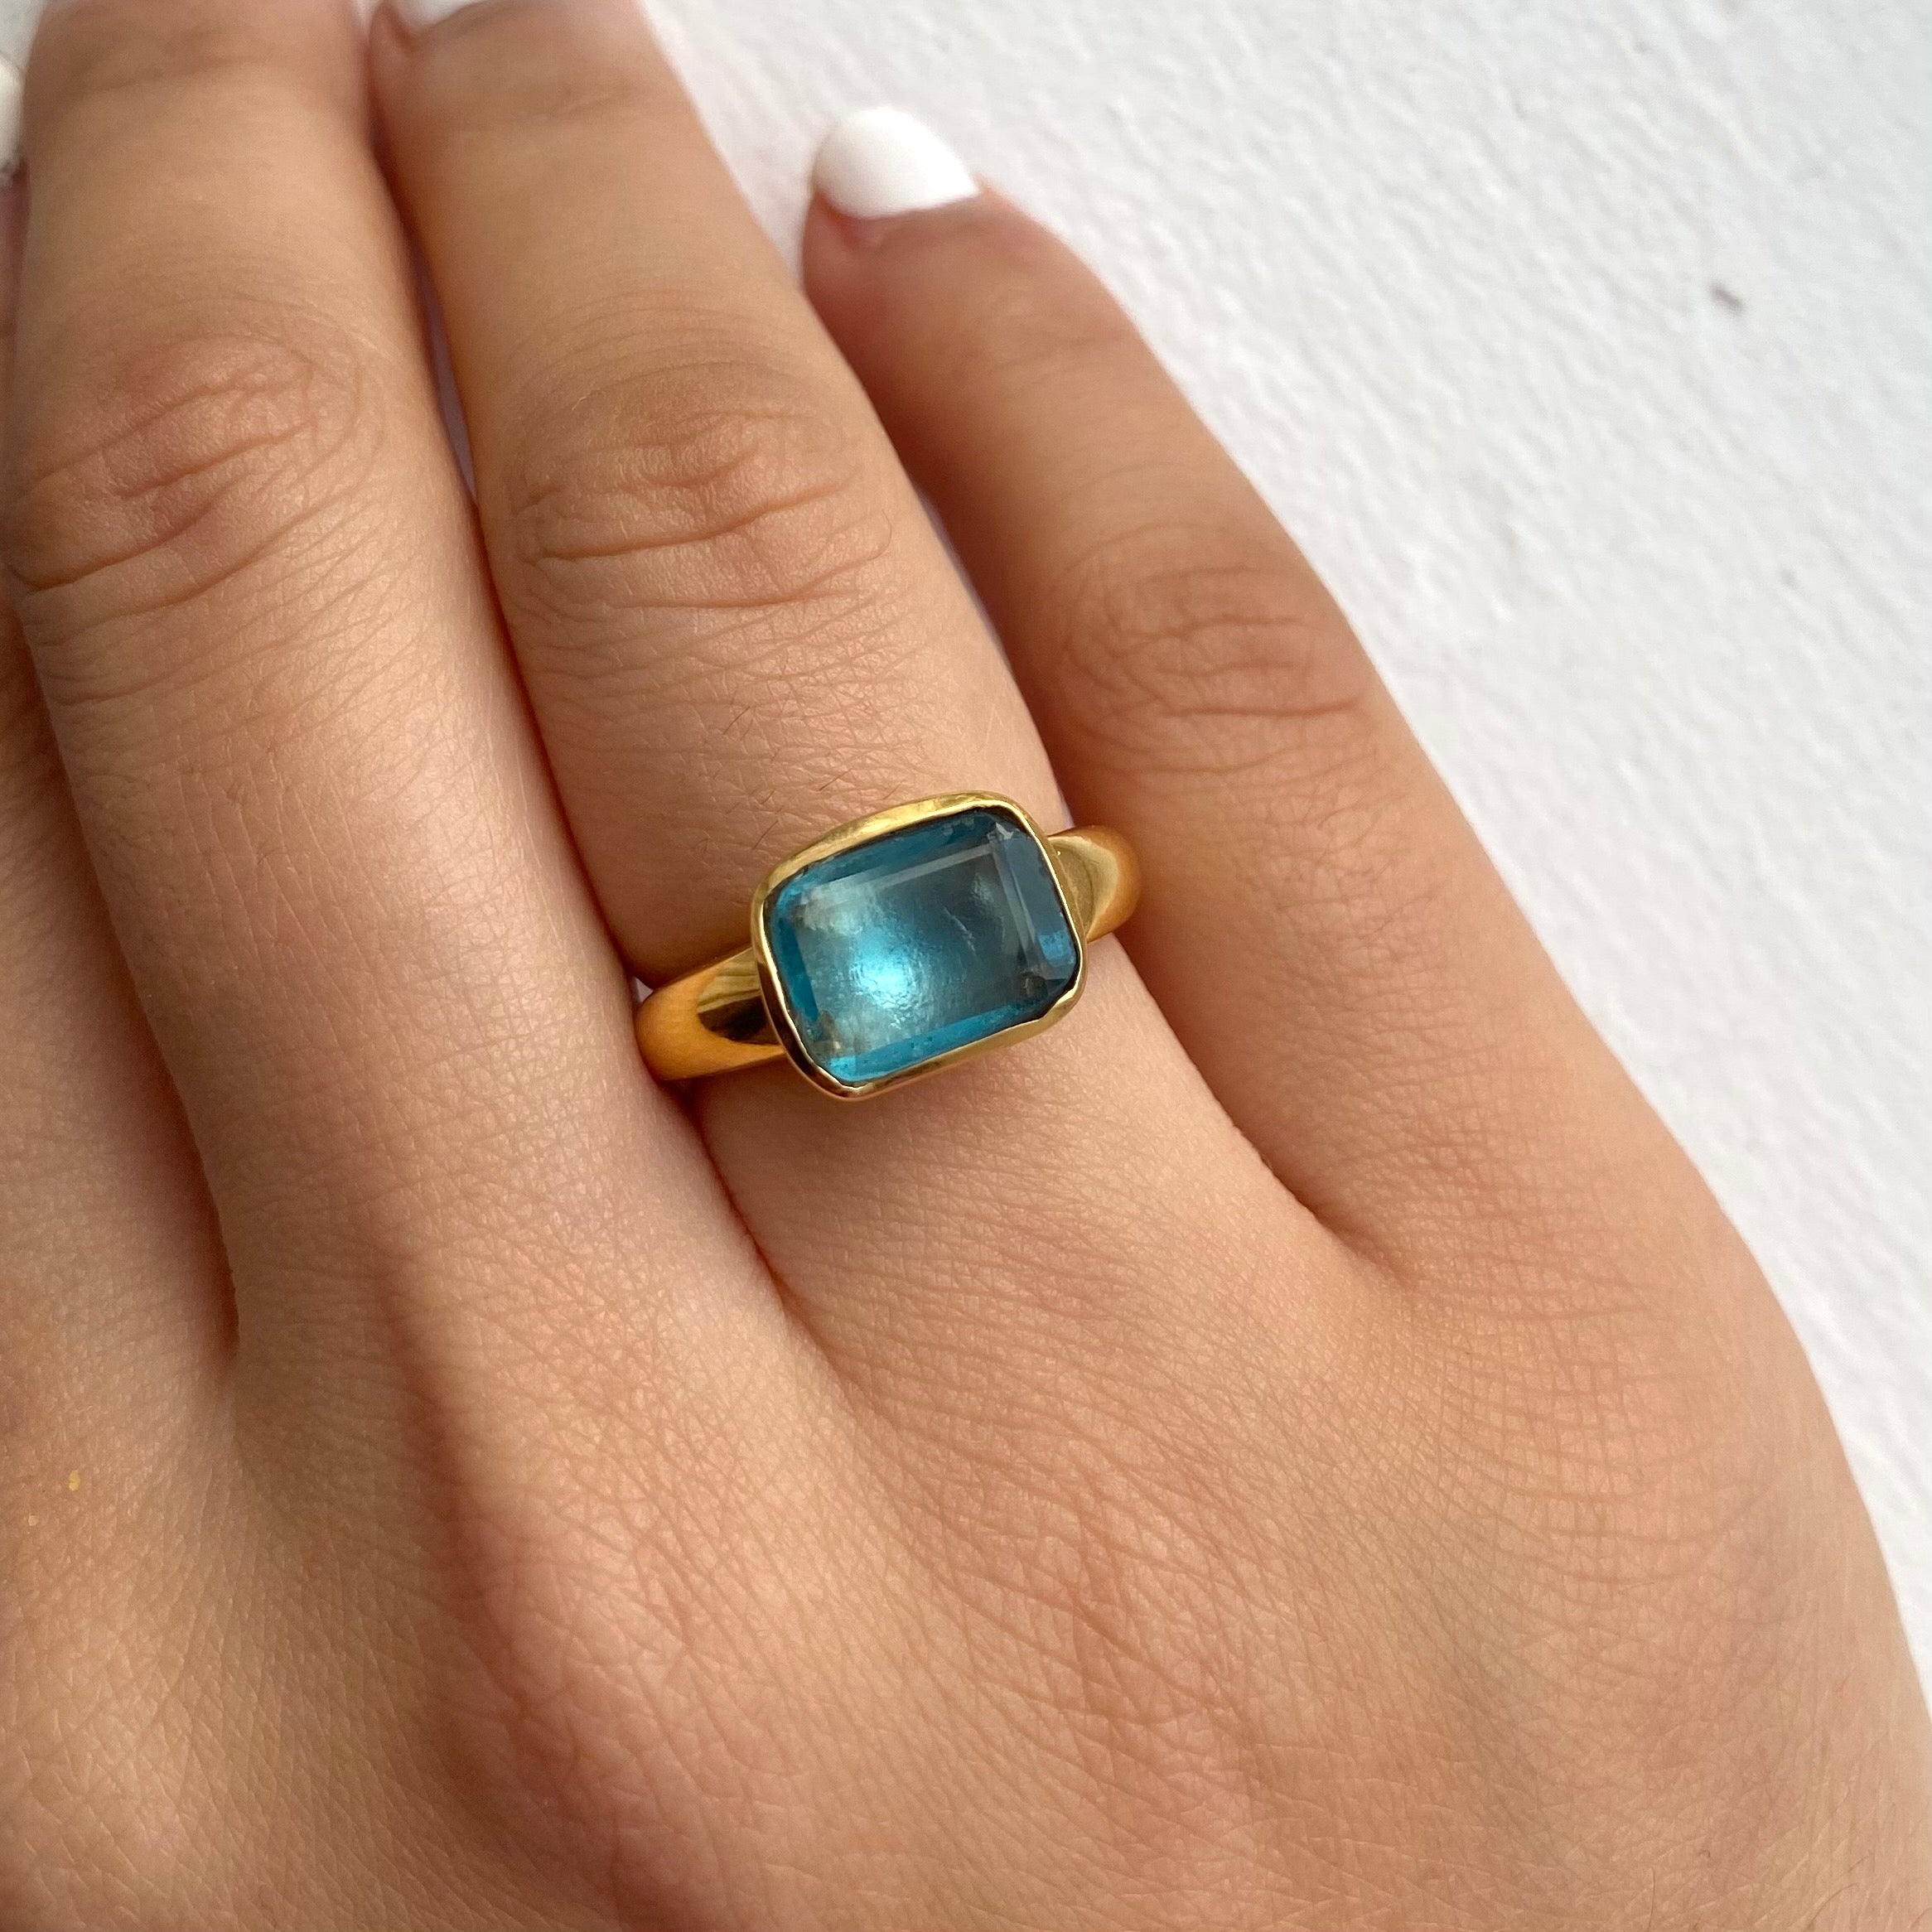 Faceted Rectangular Cut Natural Gemstone Gold Plated Sterling Silver Ring - Apatite